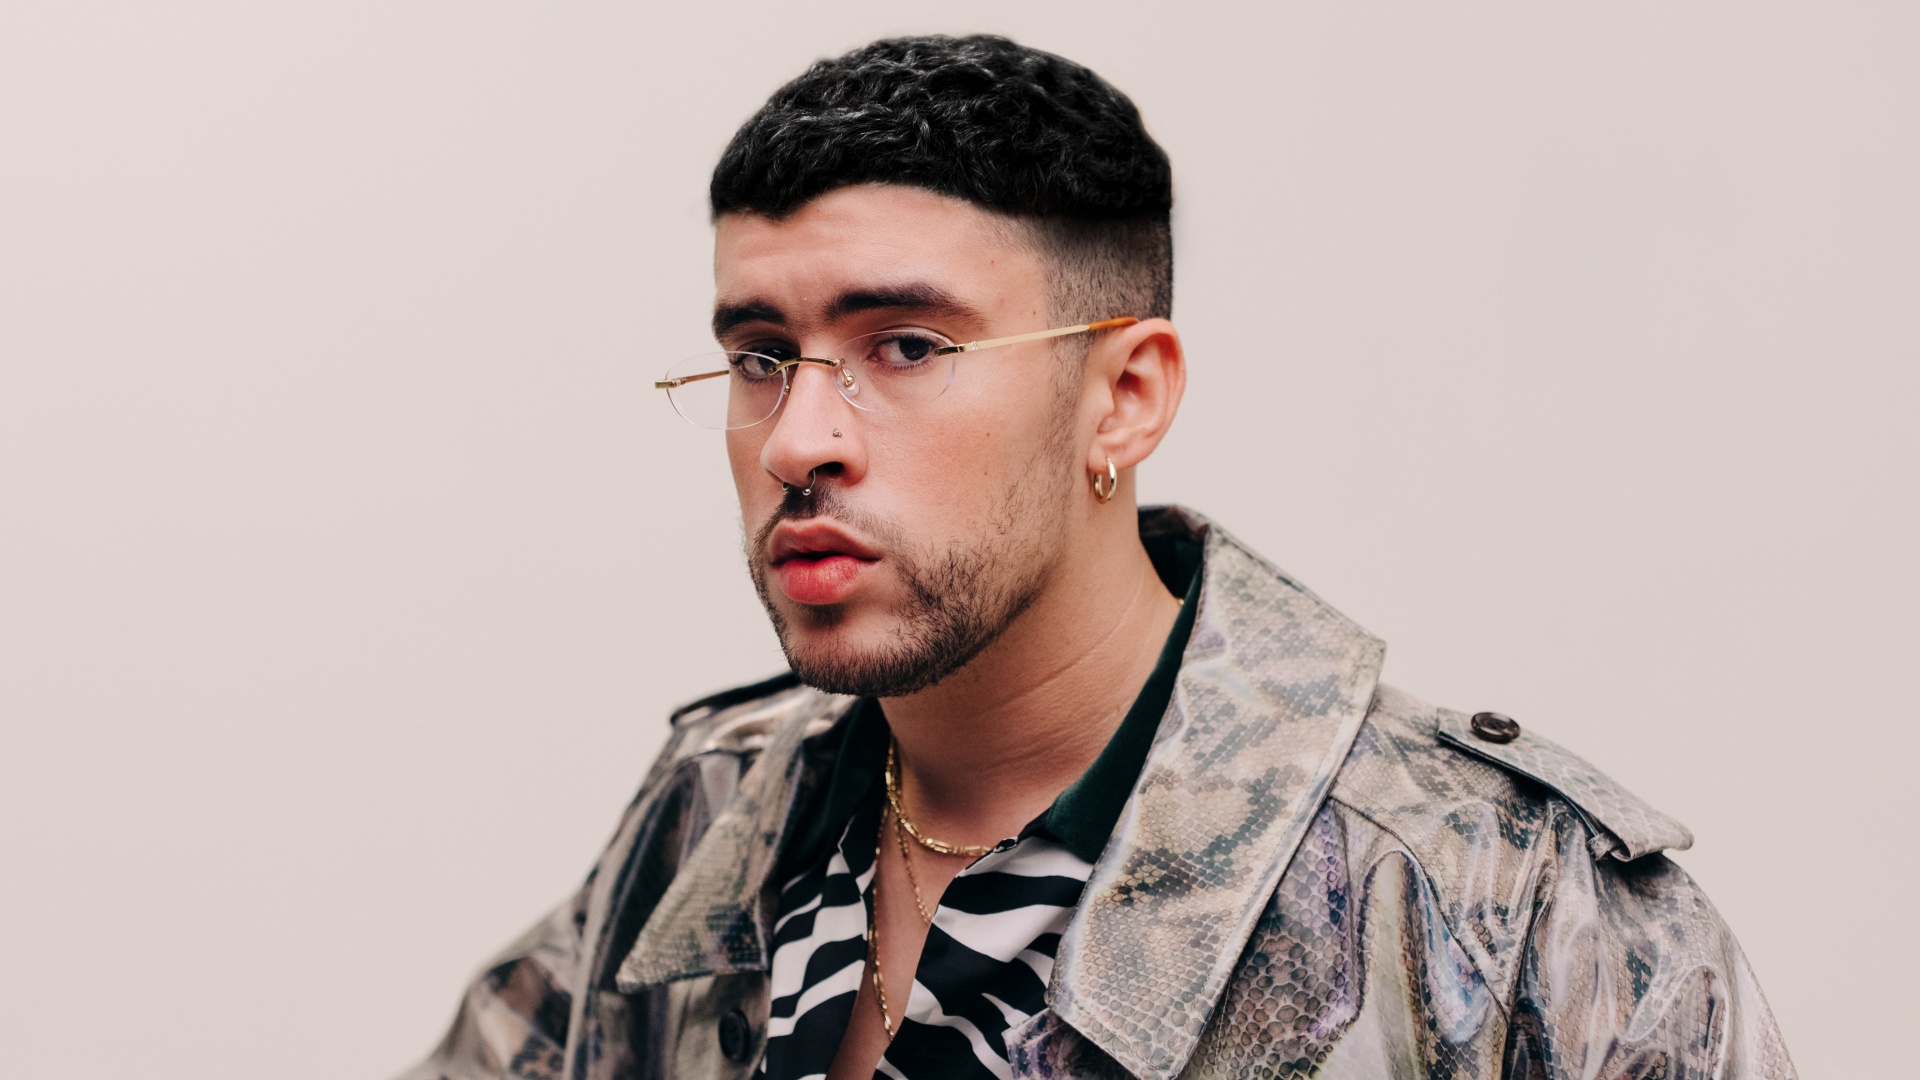 Puerto Rican Rapper Bad Bunny Arrives Editorial Stock Photo - Stock Image